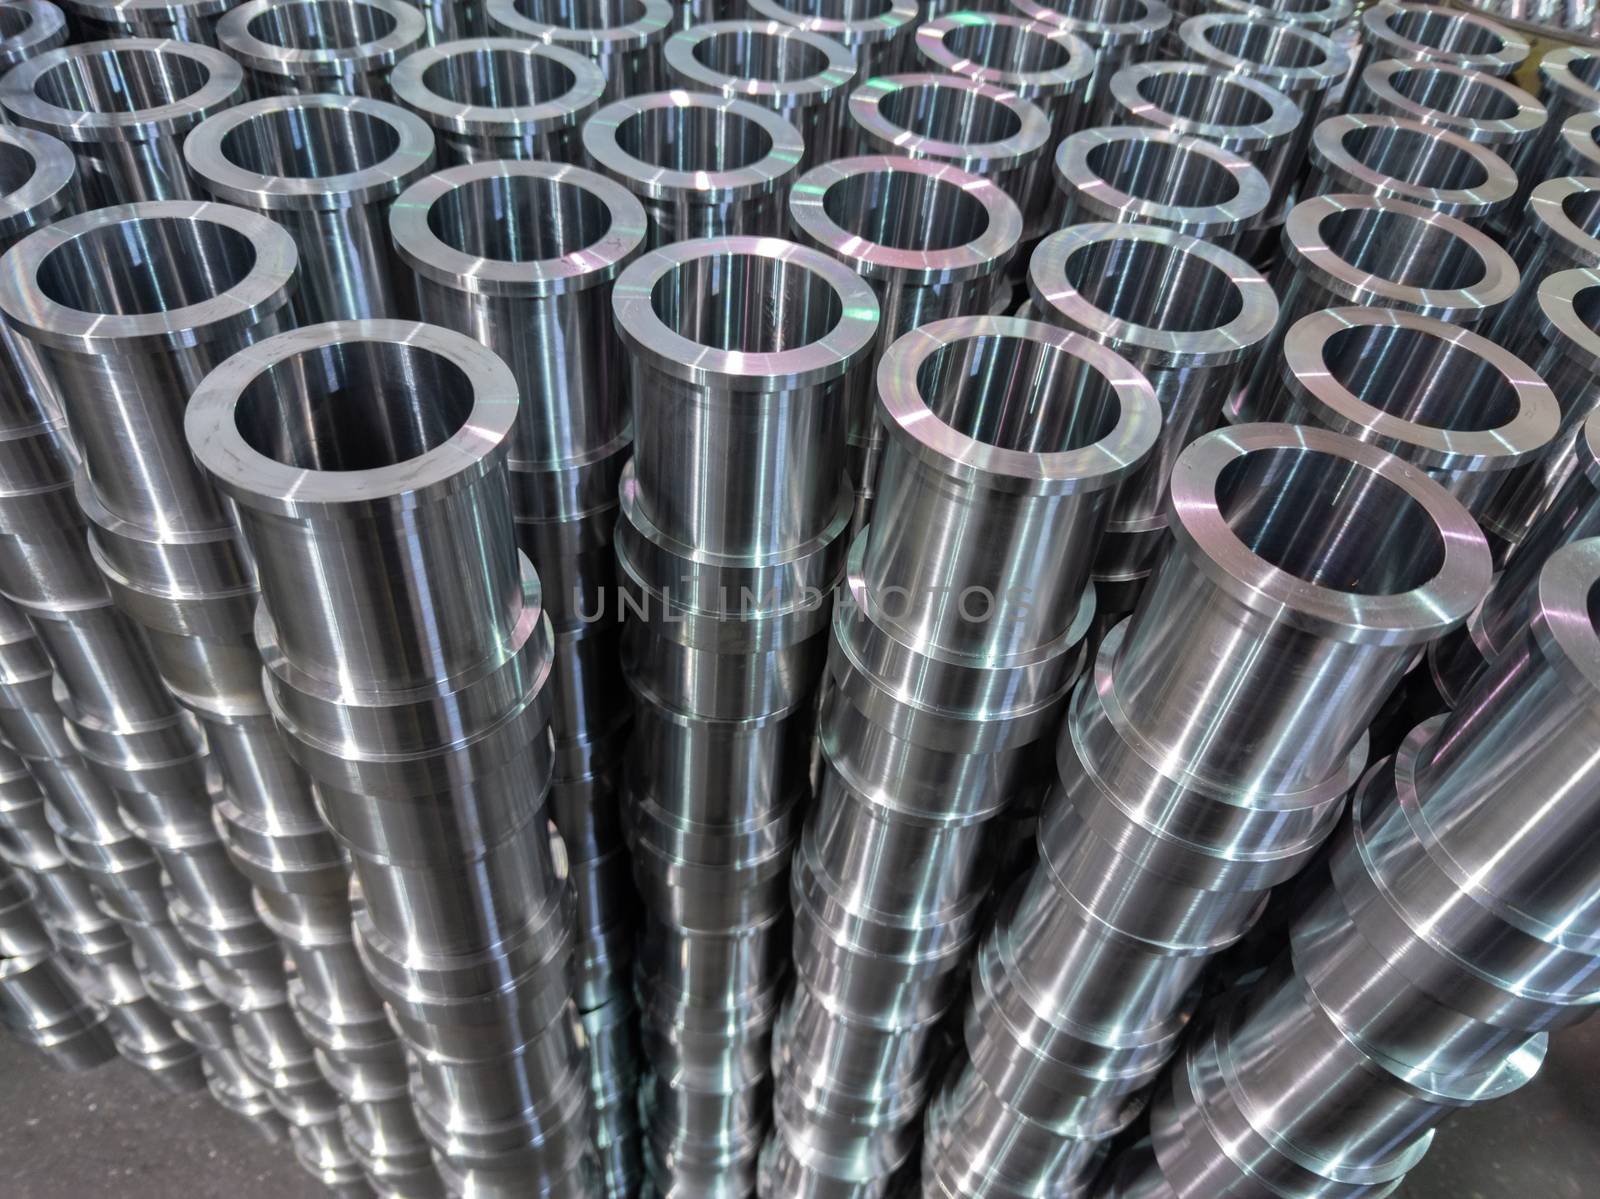 abstract industrial shiny steel production stack background with cnc machined pipes - selective focus and lens blur technique by z1b